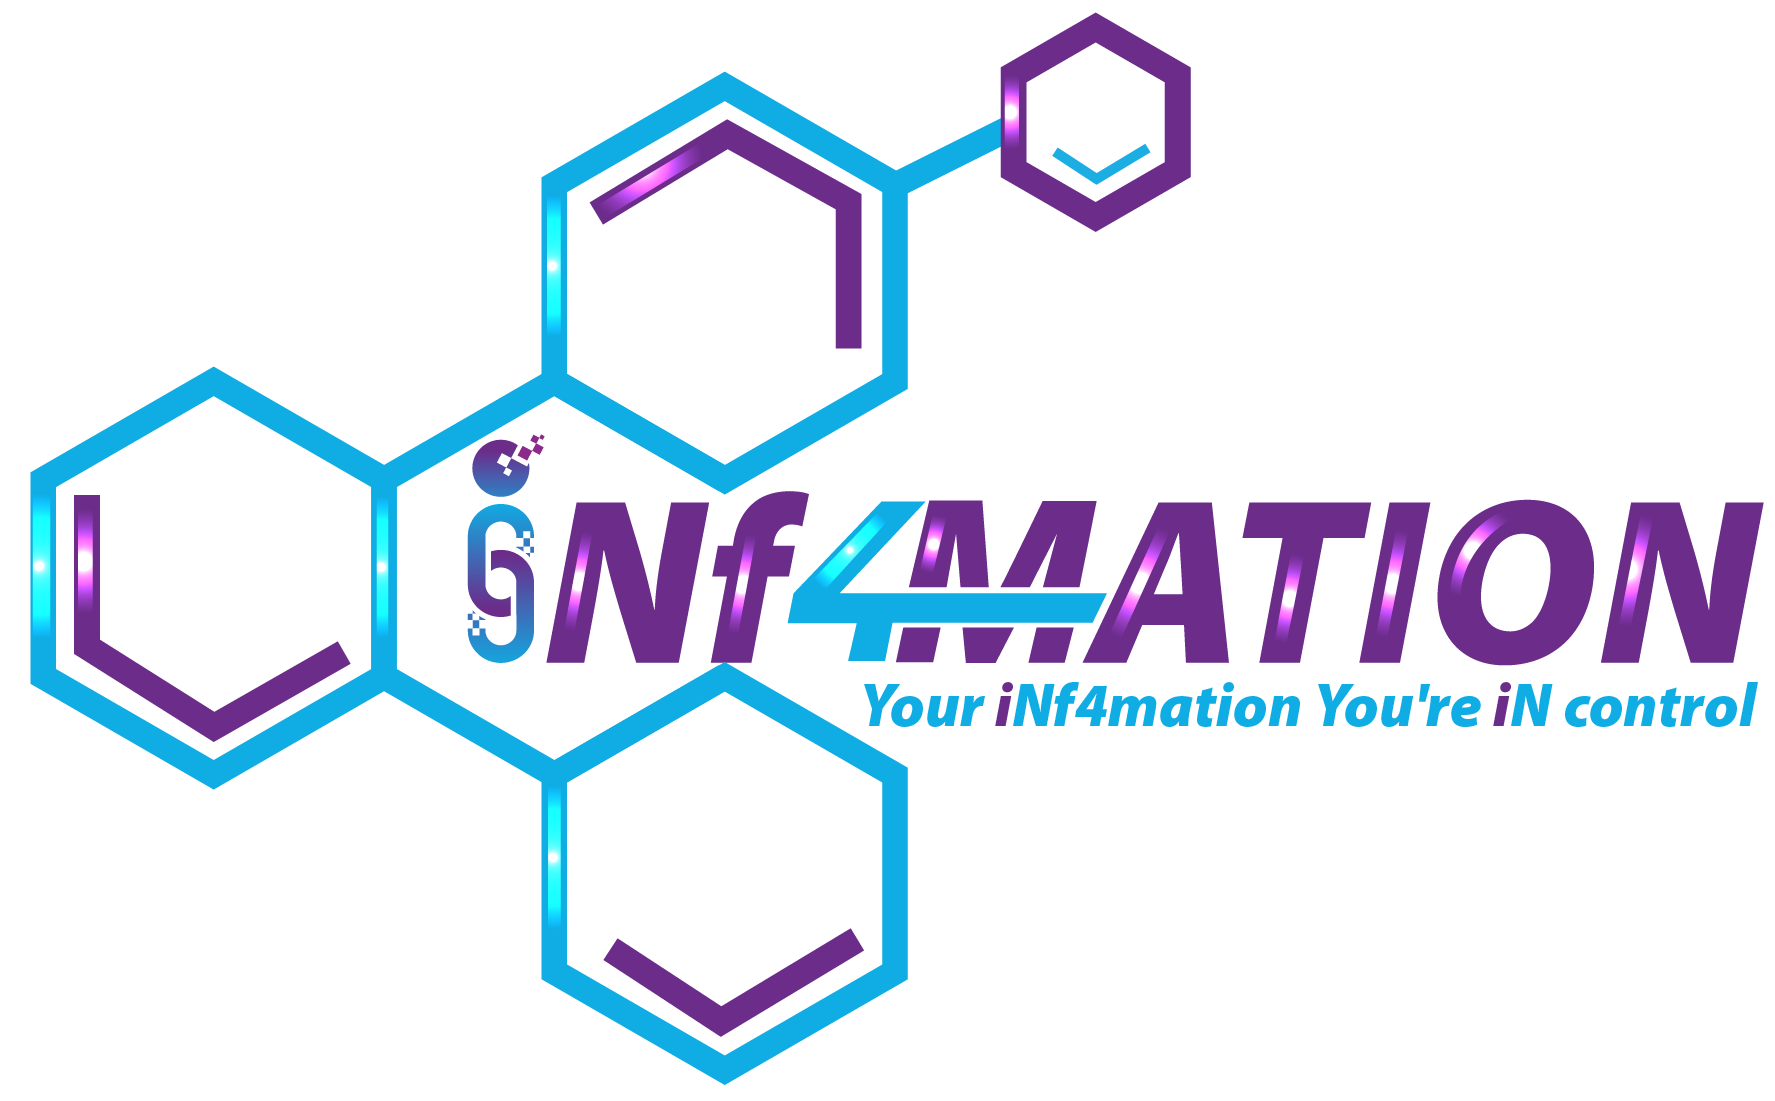 Top social media influencer Maayan Gordon thrilled to join latest breakthrough data privacy DeFi platform "iNf4mation"